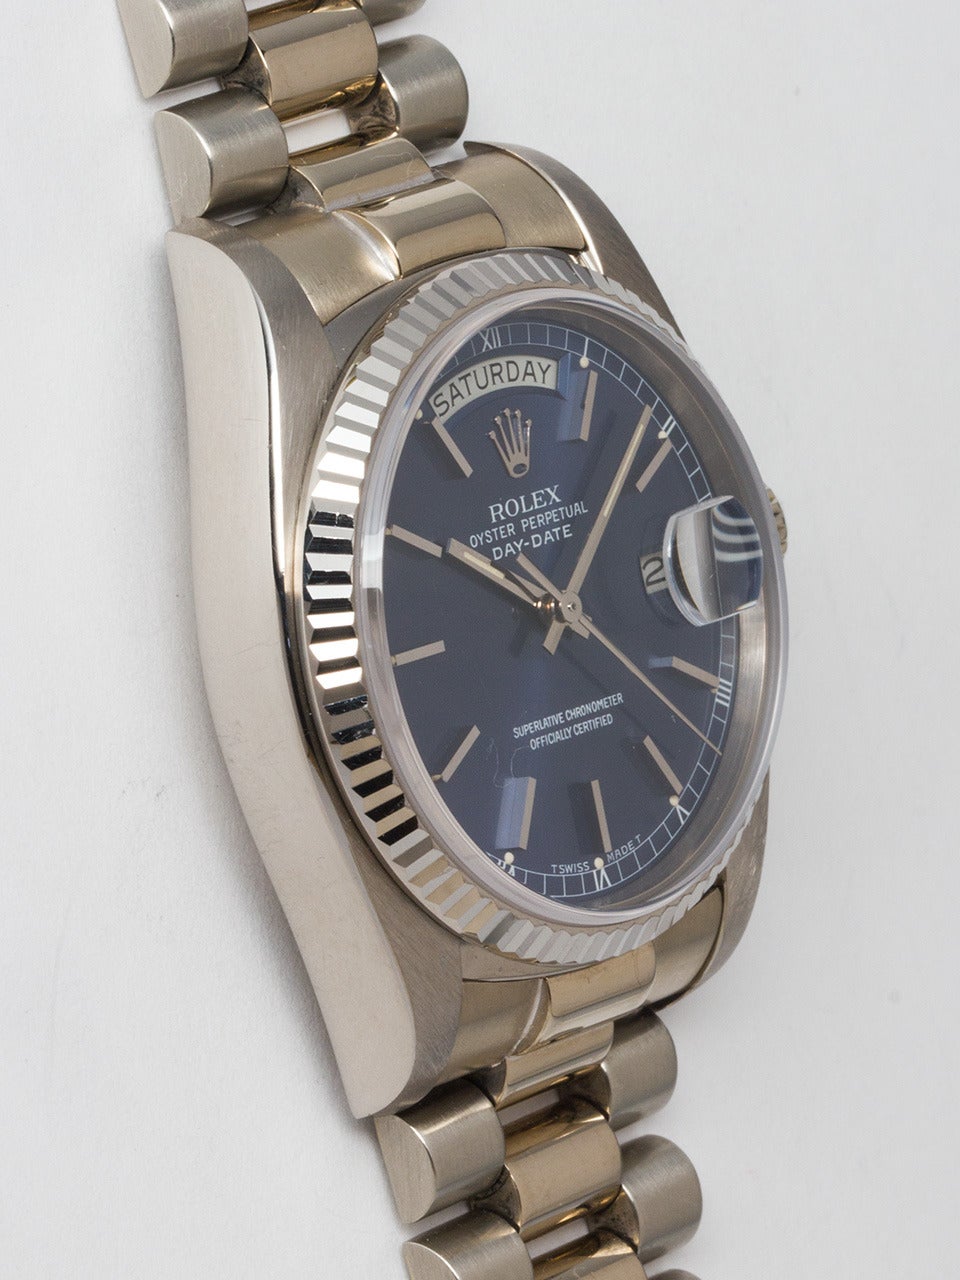 Rolex 18K White Gold Day-Date President ref 1803, serial #7.3 million circa 1982. 36mm diameter case with fluted bezel and sapphire crystal. Very pleasing original sapphire blue dial with applied silver indexes and hands. Powered by caliber 3055